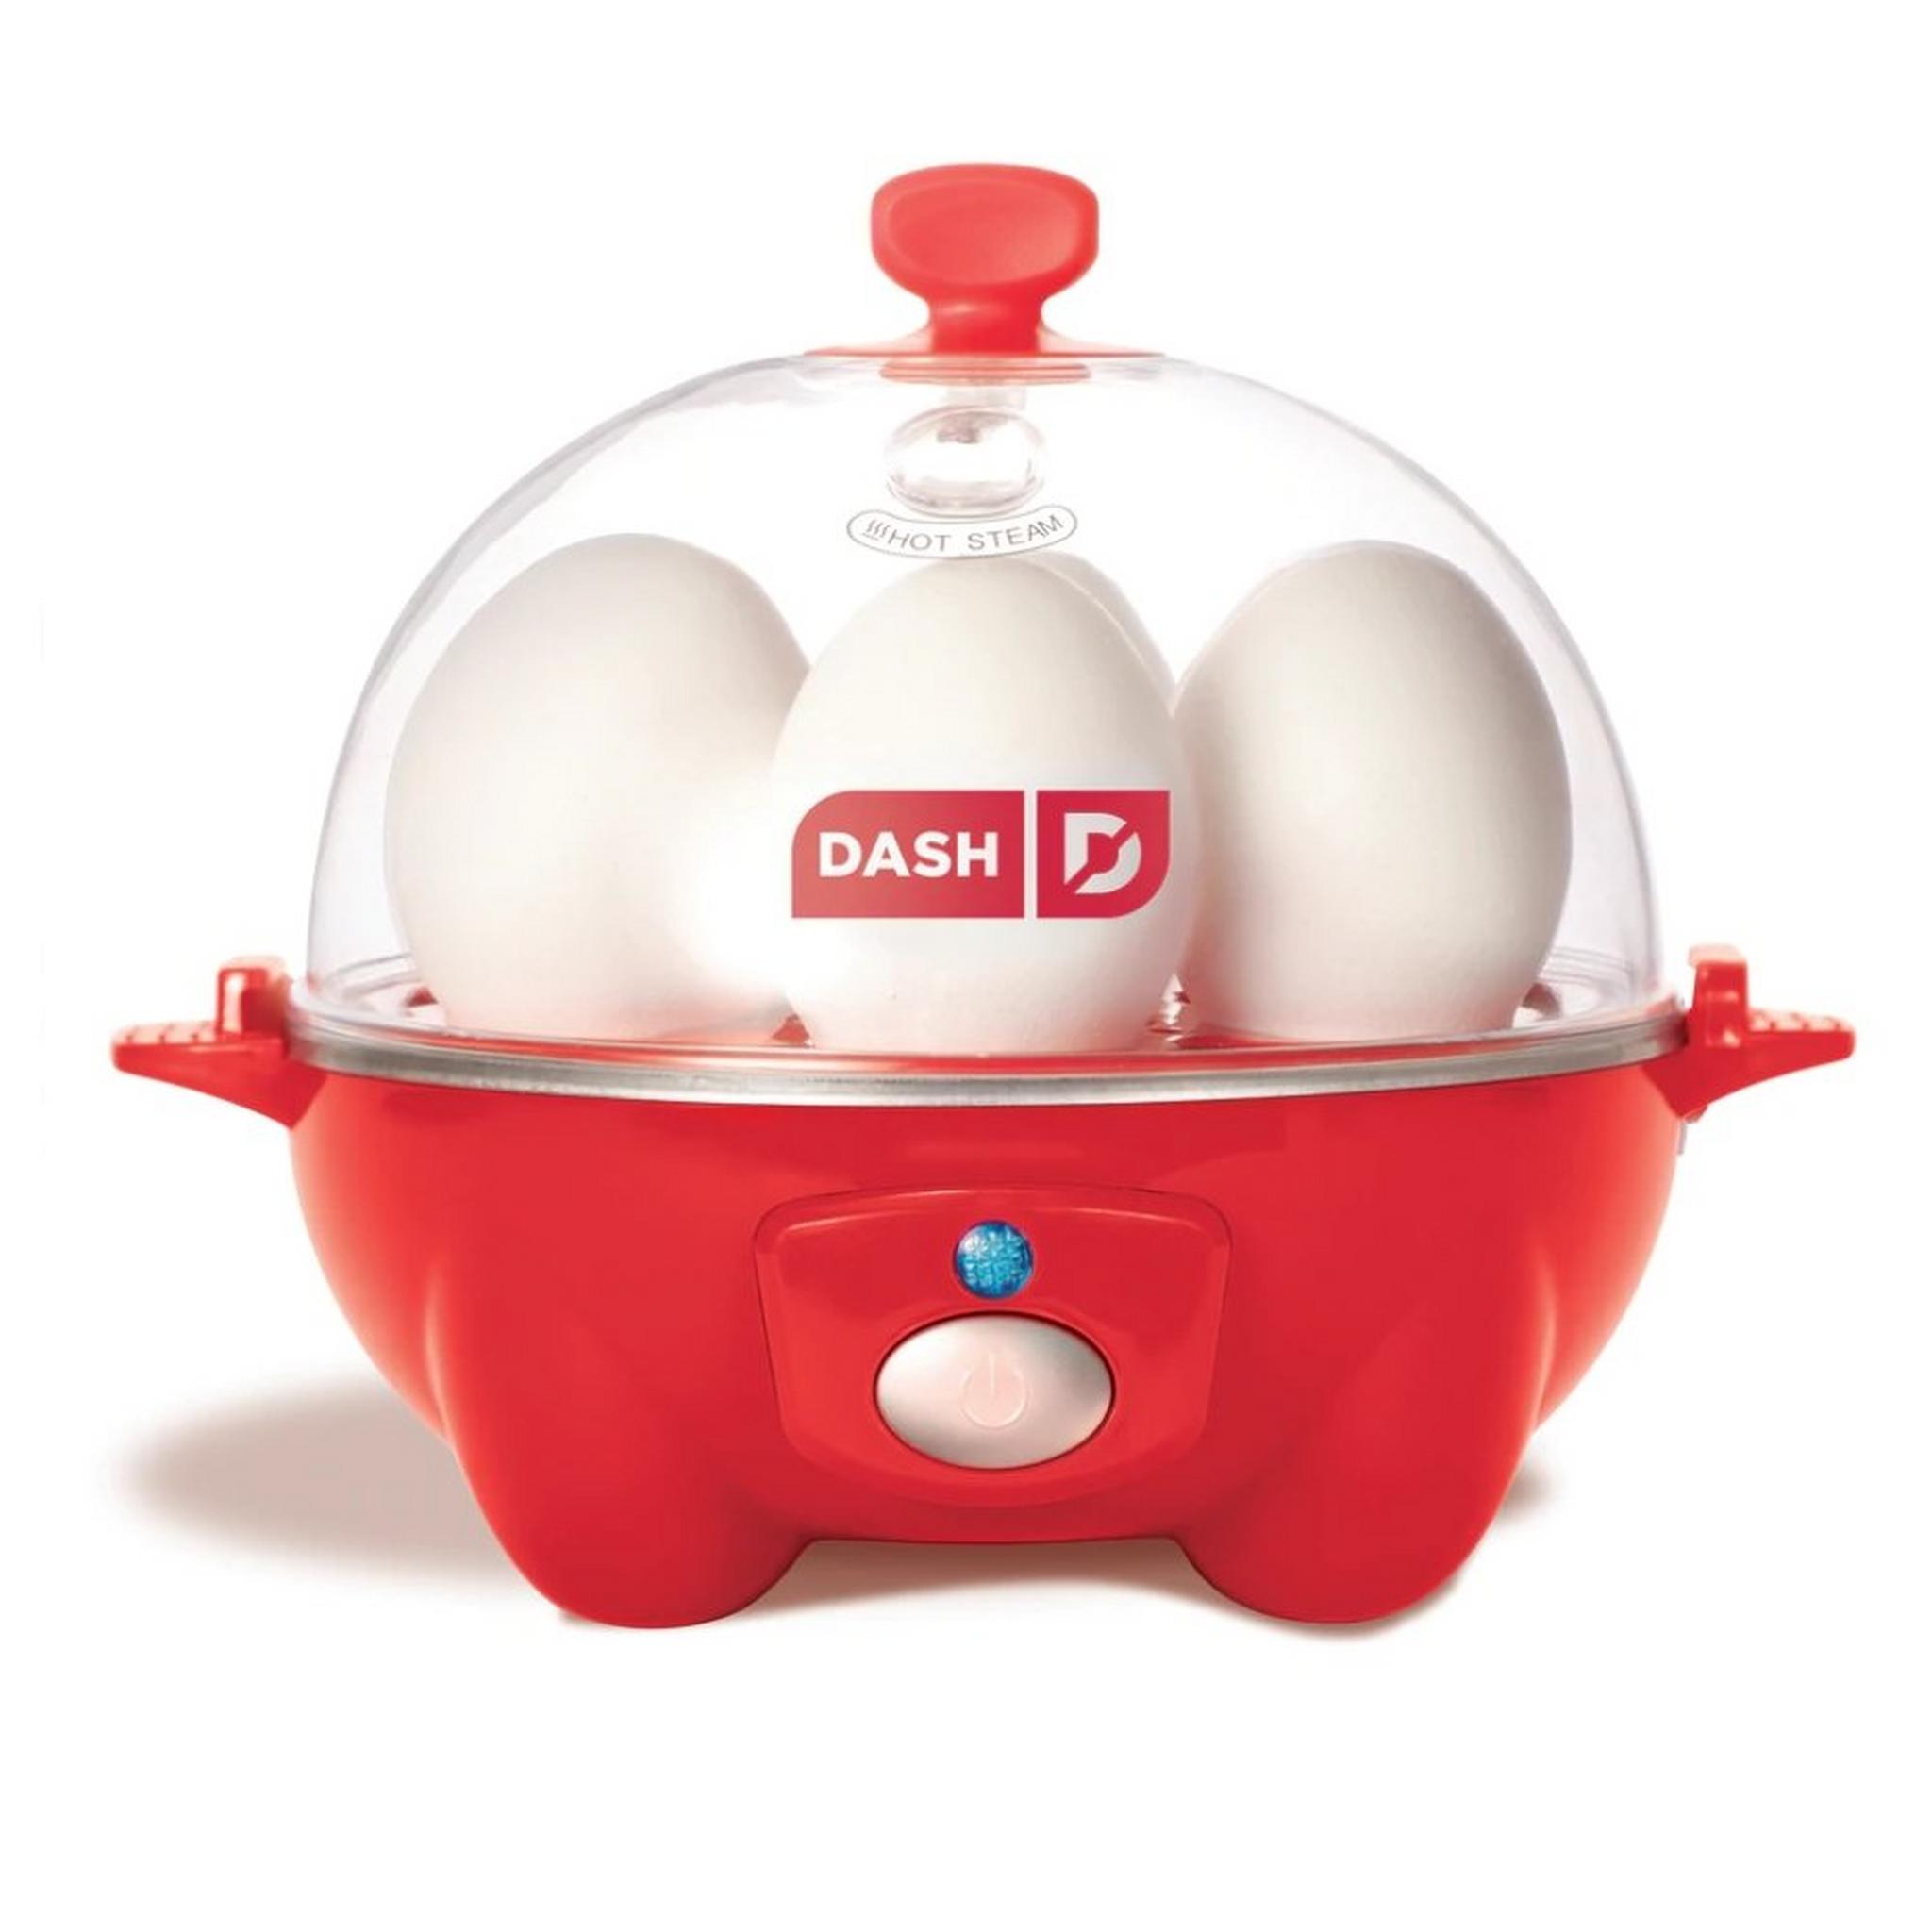 Dash Rapid Egg Cooker, 360W, DEC005RD - Red